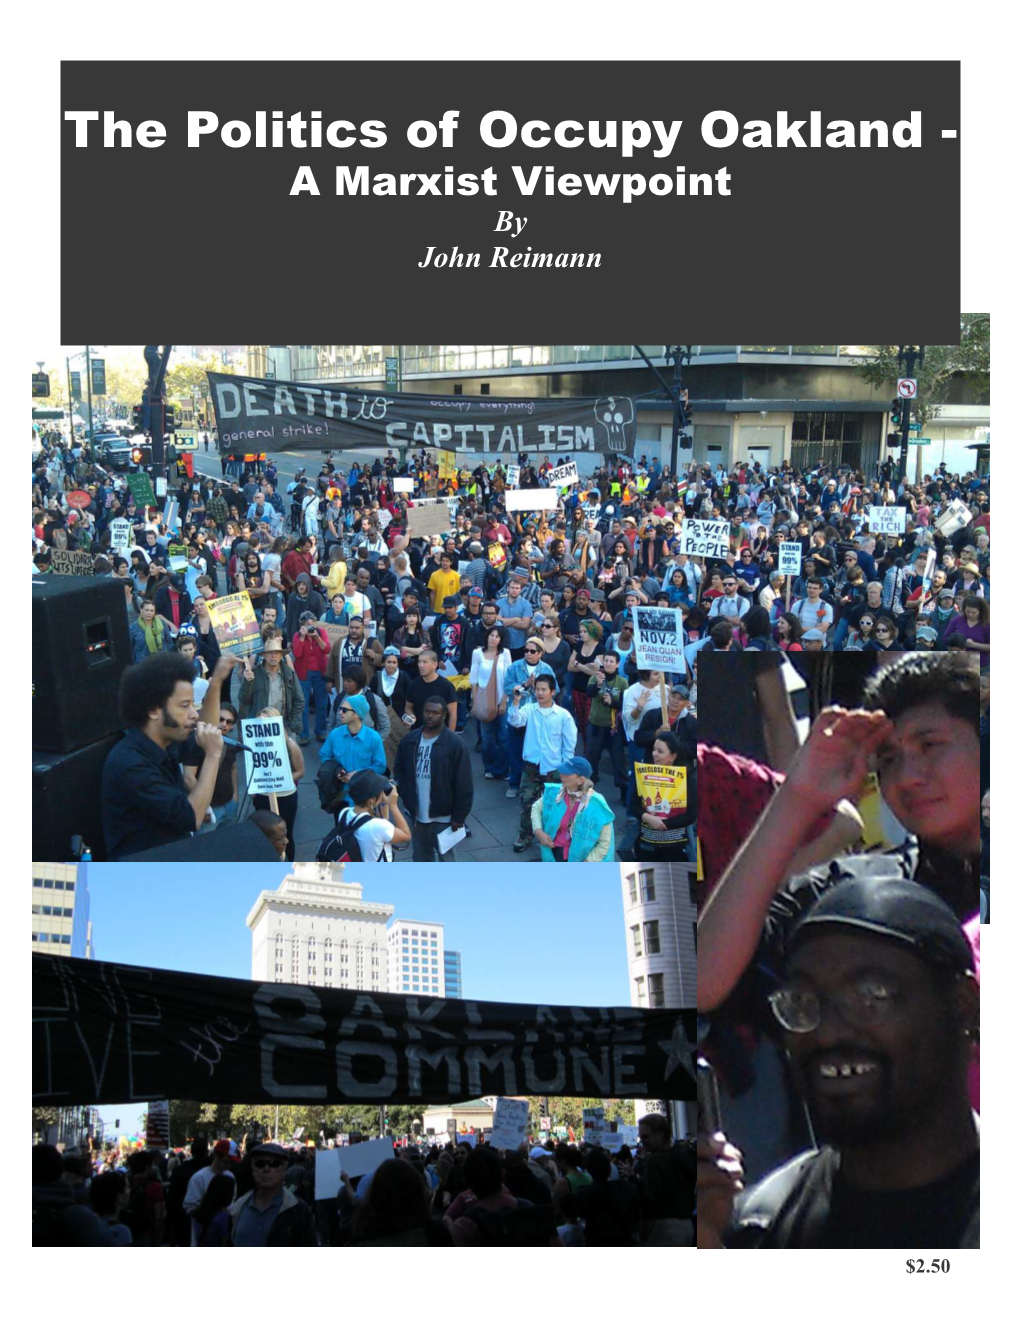 The Politics of Occupy Oakland - a Marxist Viewpoint by John Reimann